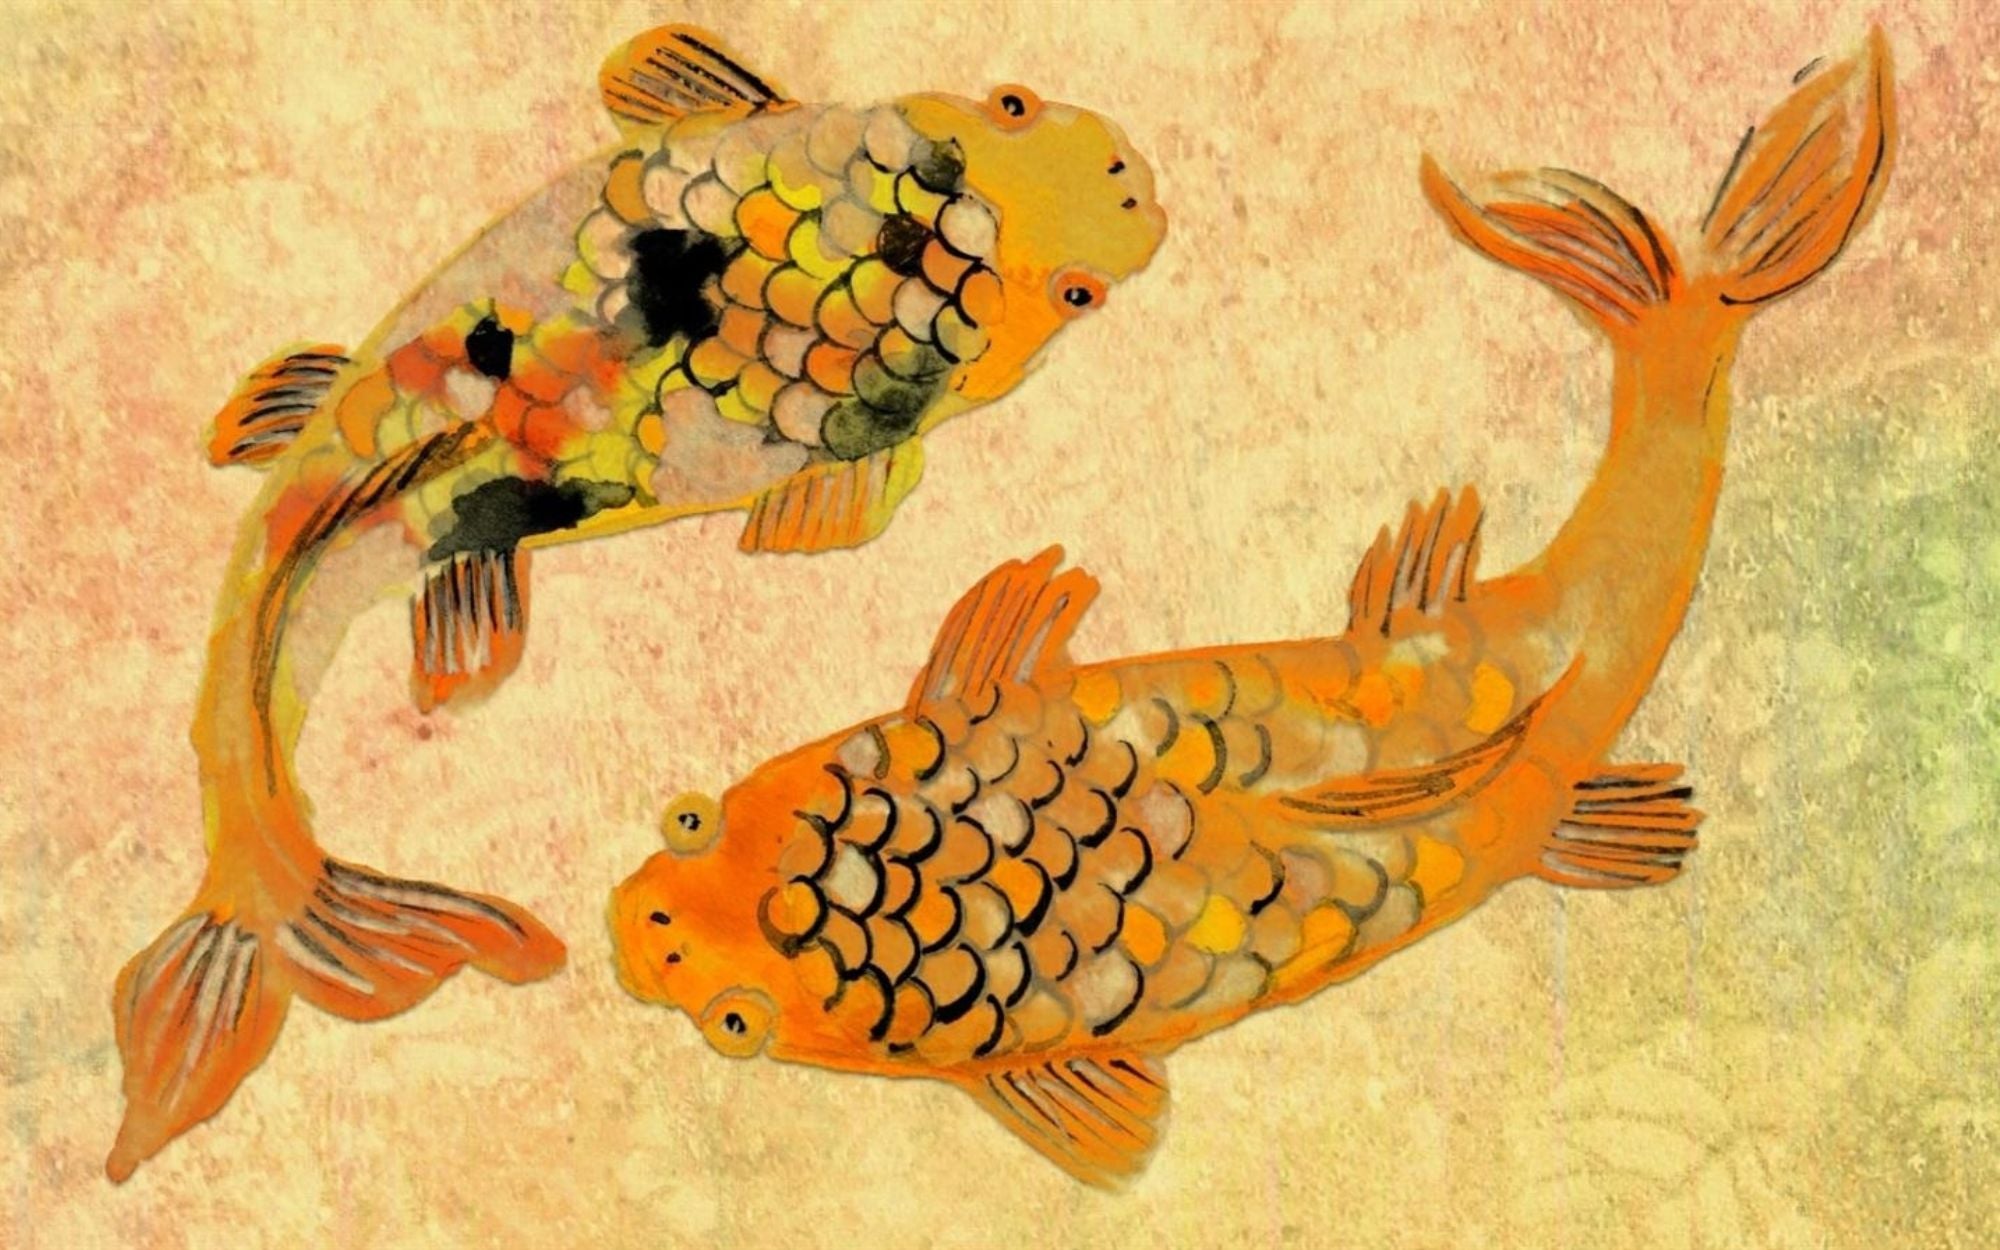 Koi Fish Meaning & Symbolism in Feng Shui